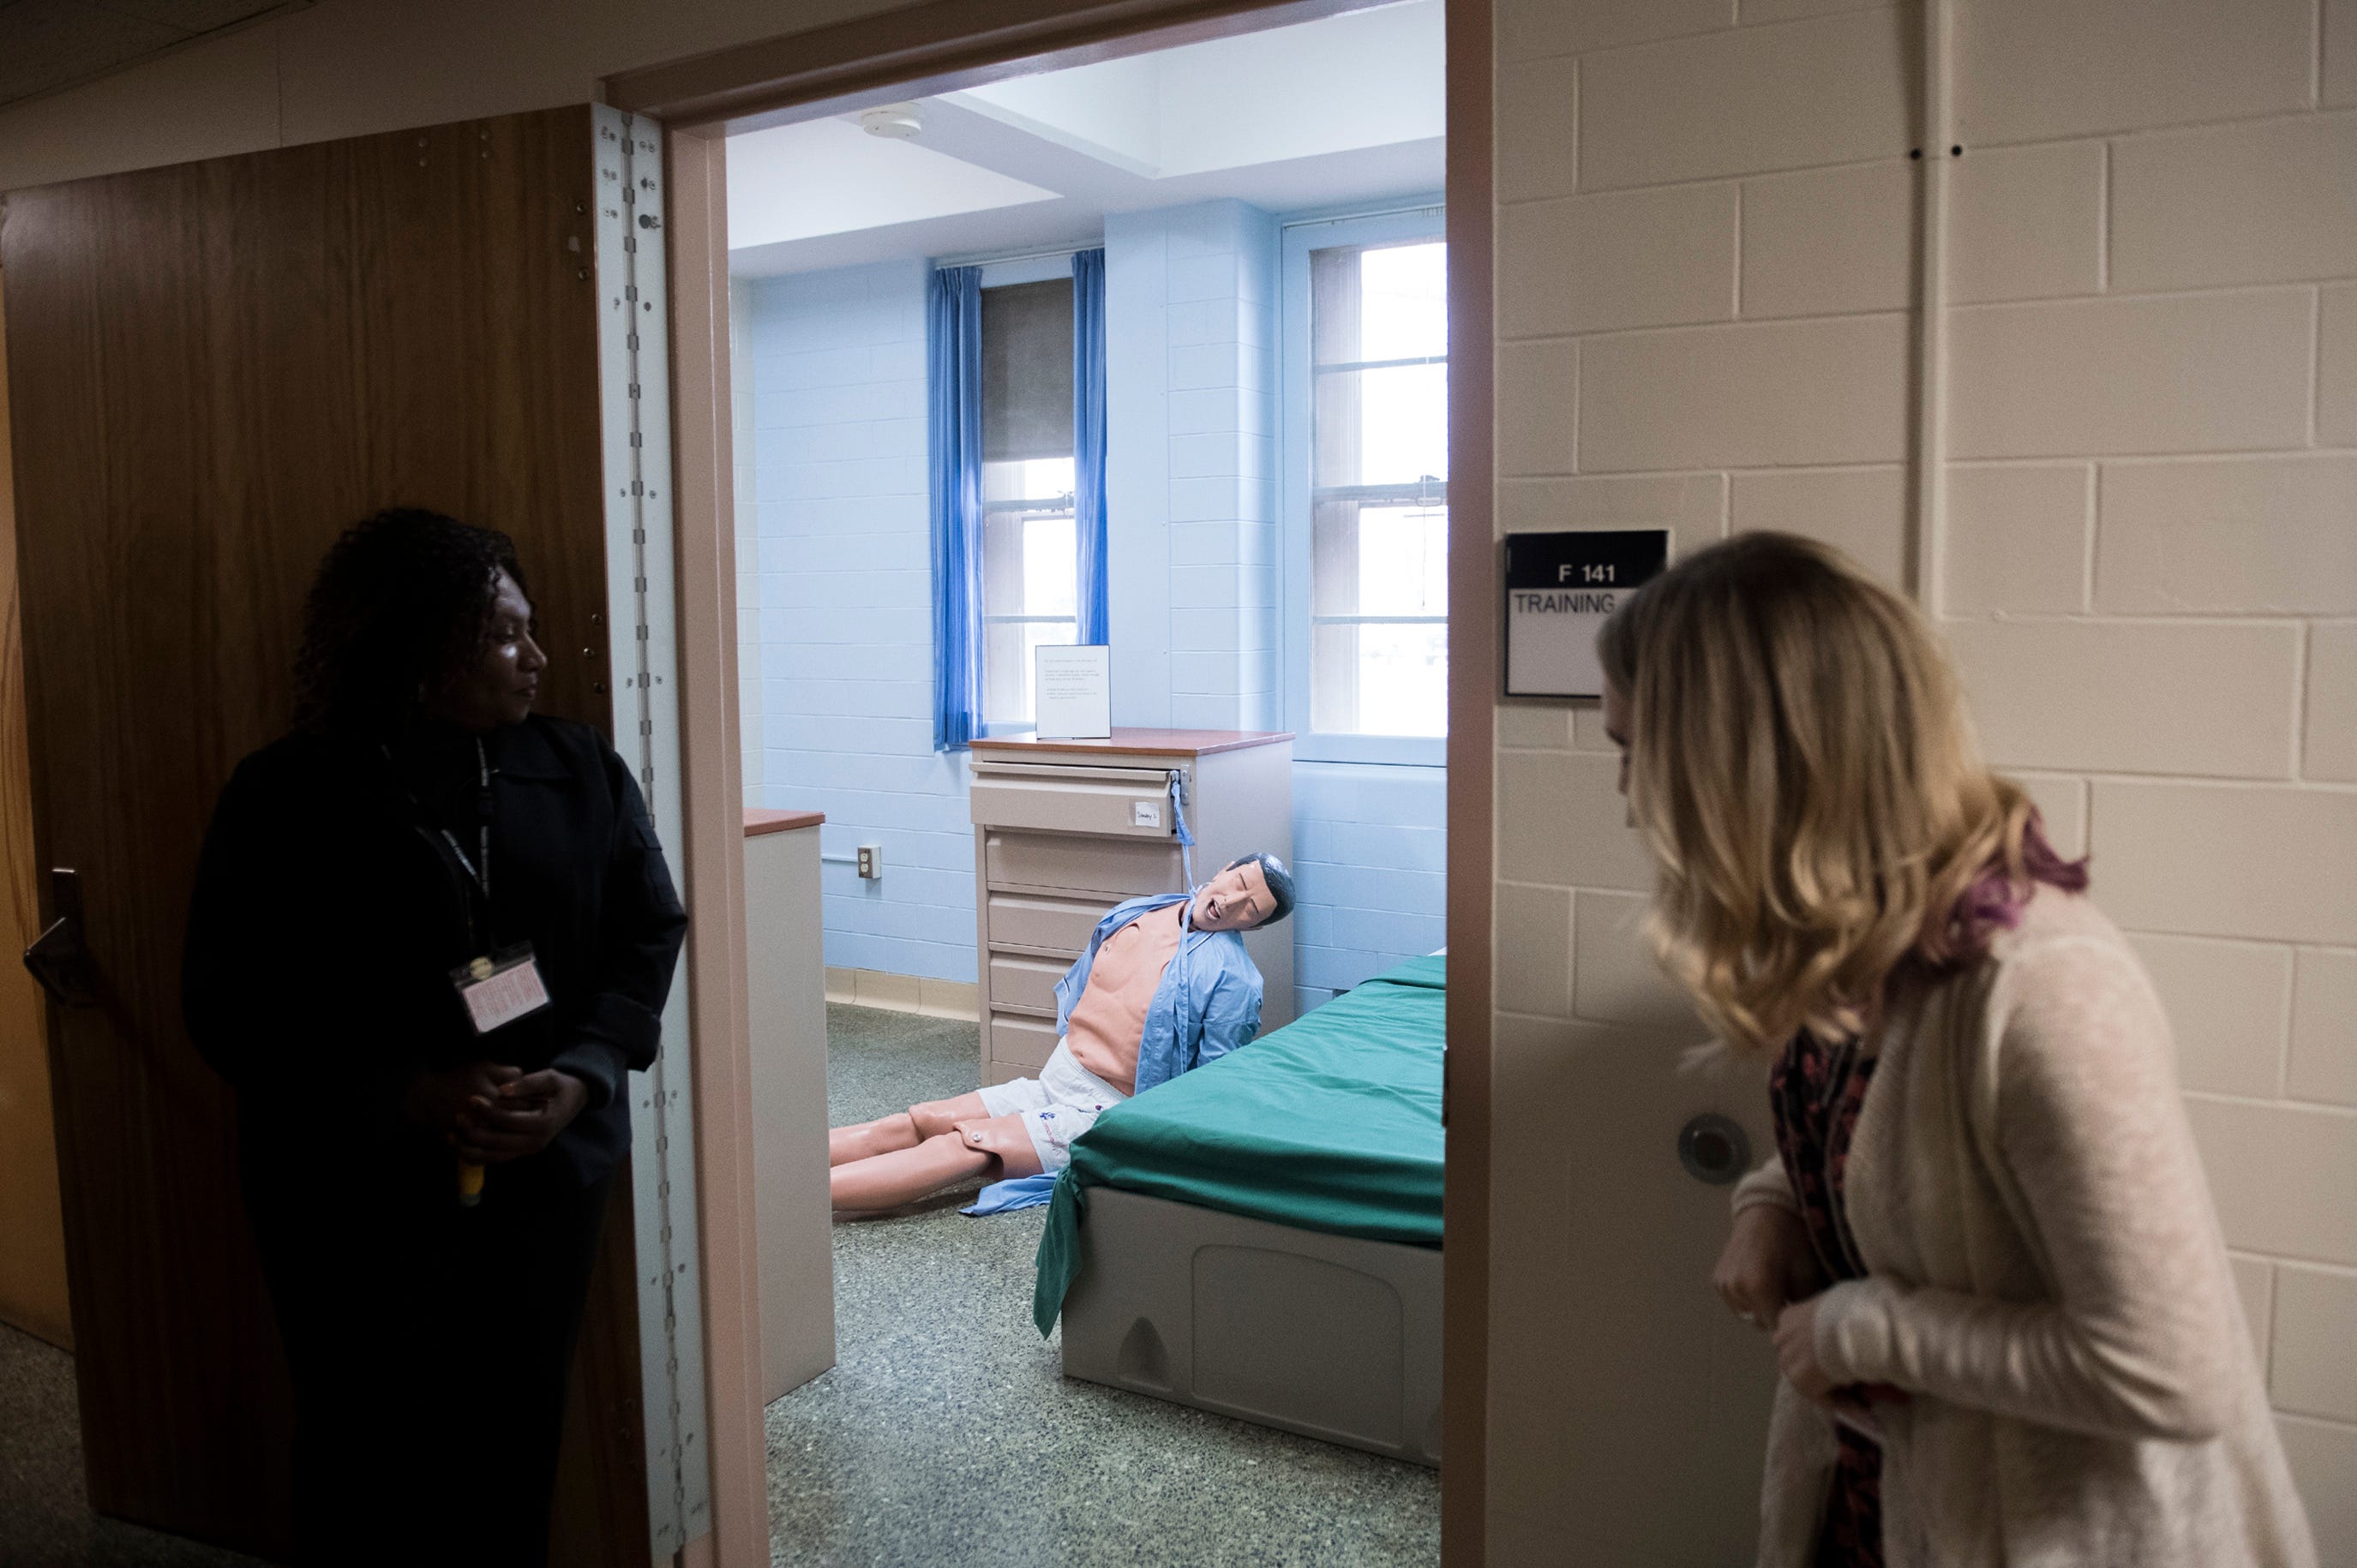 Chief nursing officer Evelyn Ngwa, left, and instructor of nursing Erica Misiak look in on a simulation dummy at Ancora Psychiatric Hospital in Winslow Twp., N.J.